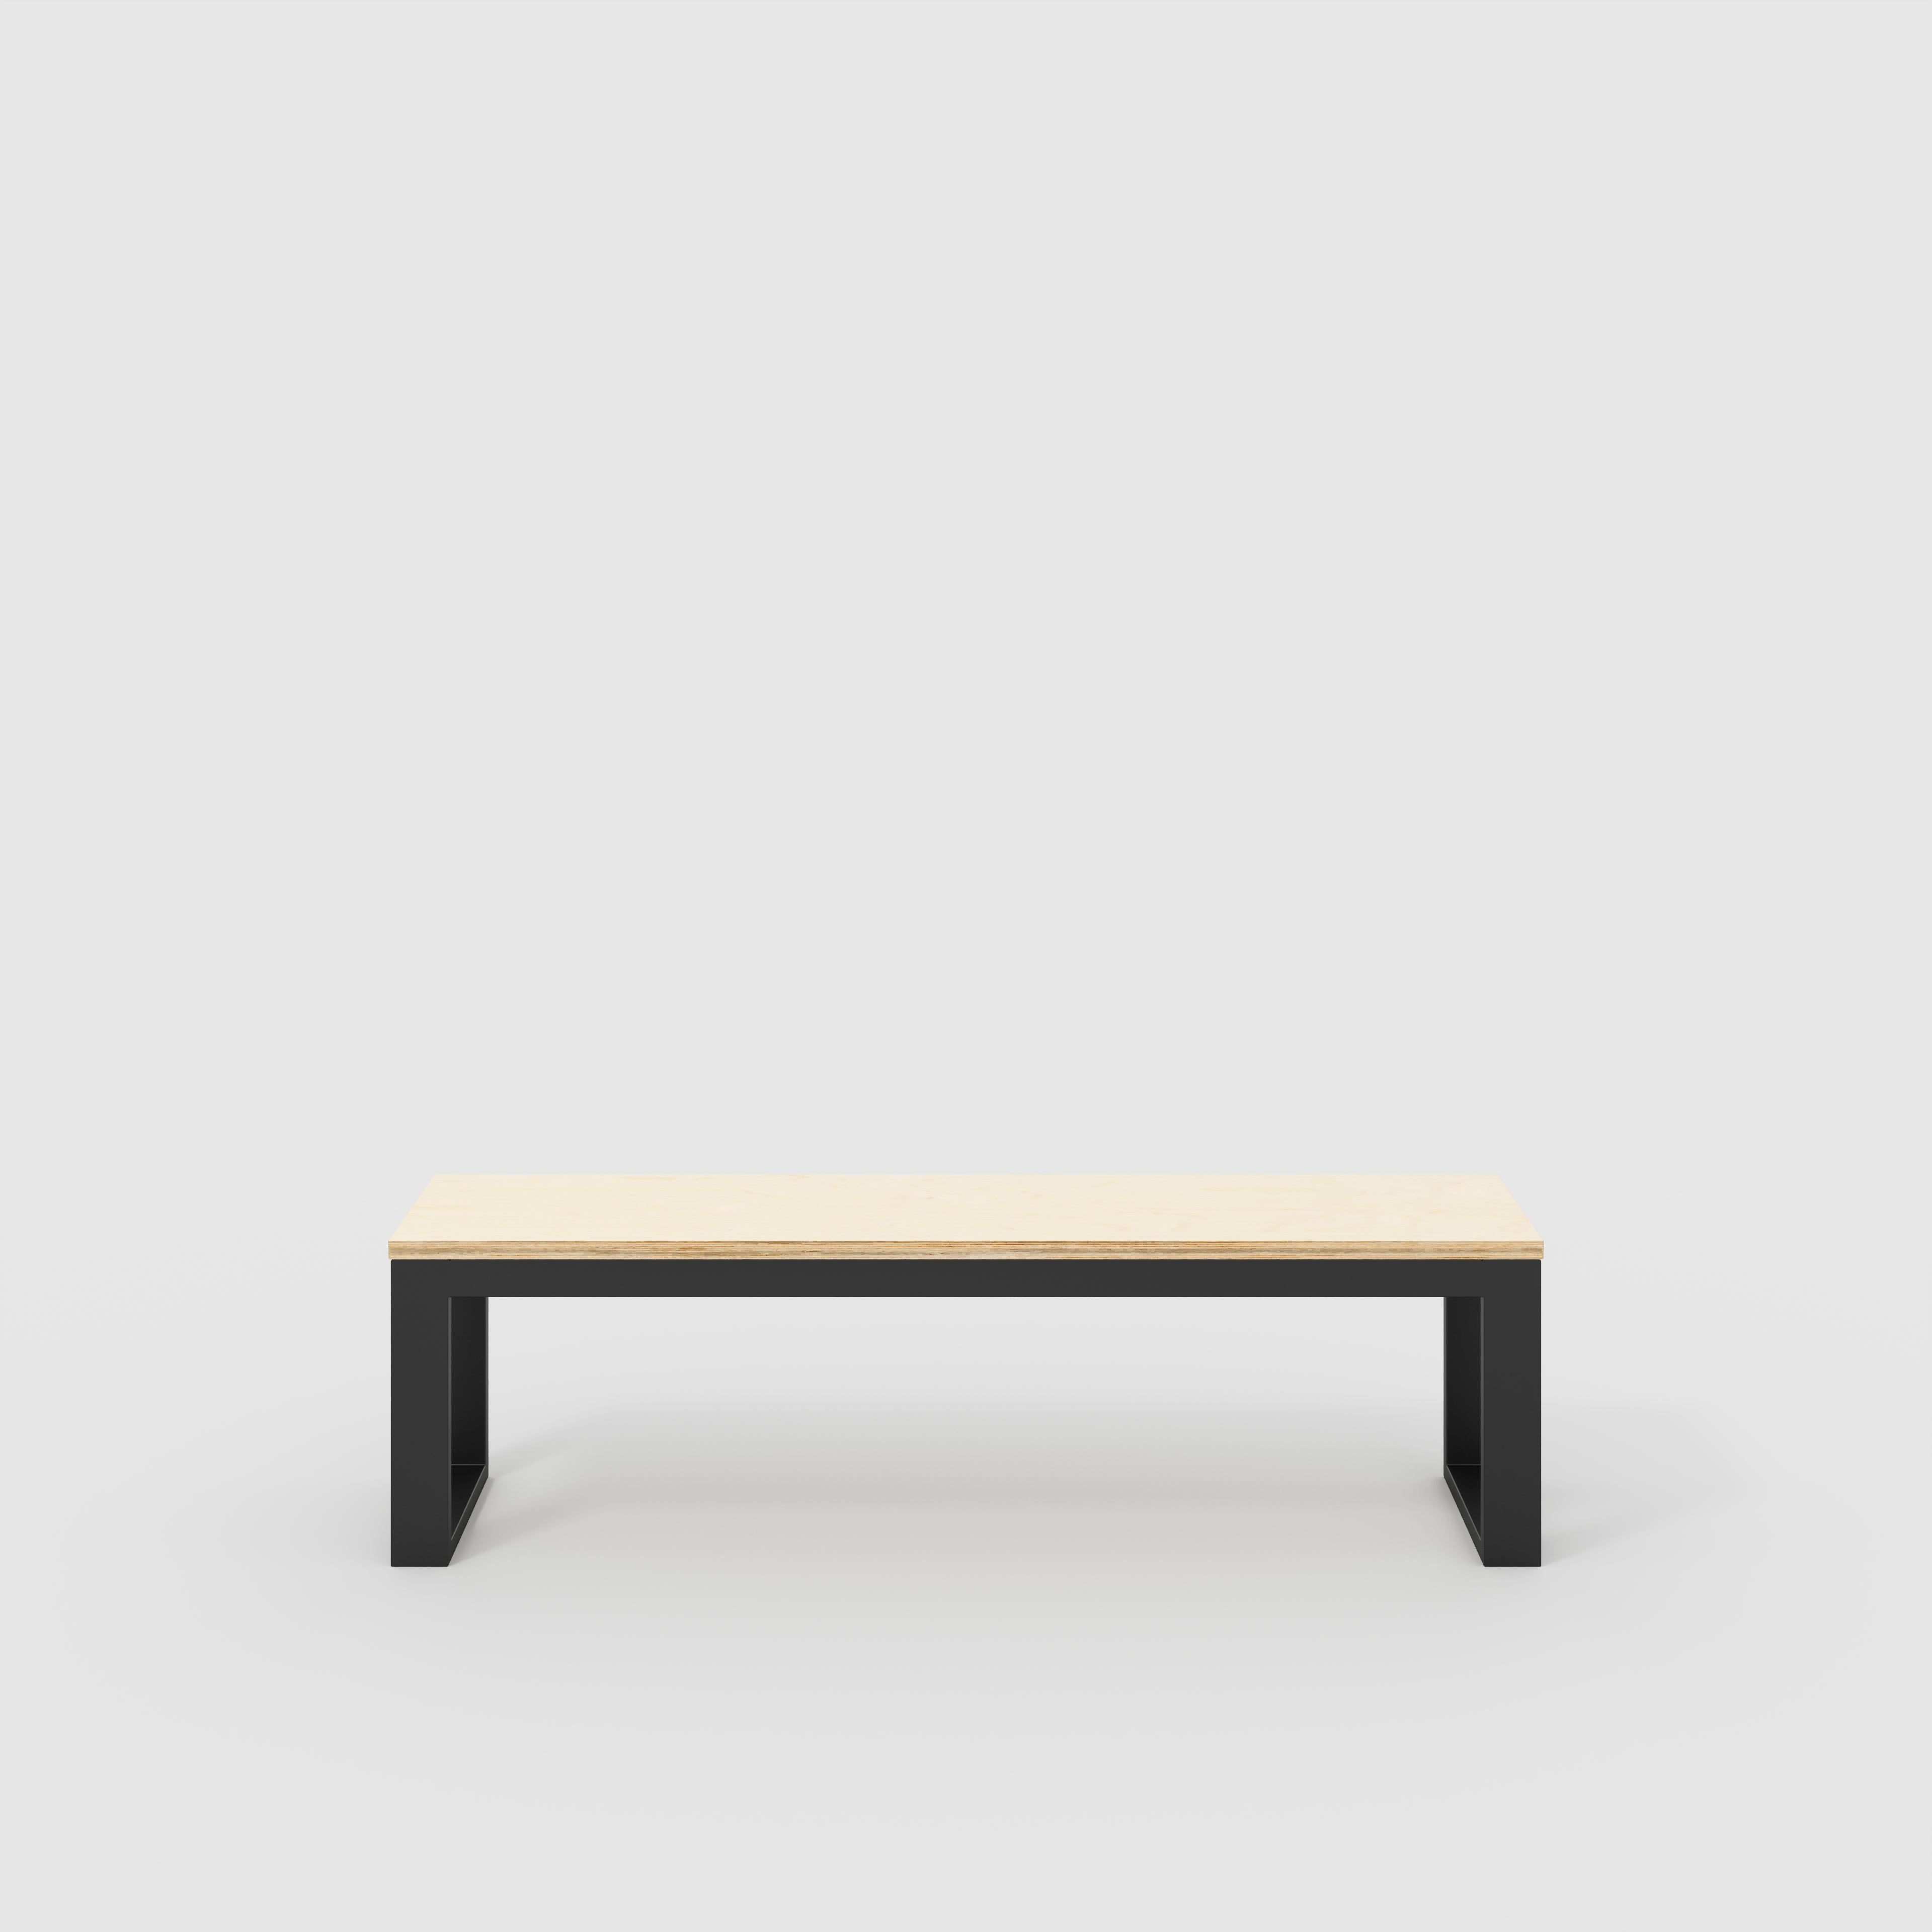 Bench Seat with Black Industrial Frame - Plywood Birch - 1500(w) x 325(d)